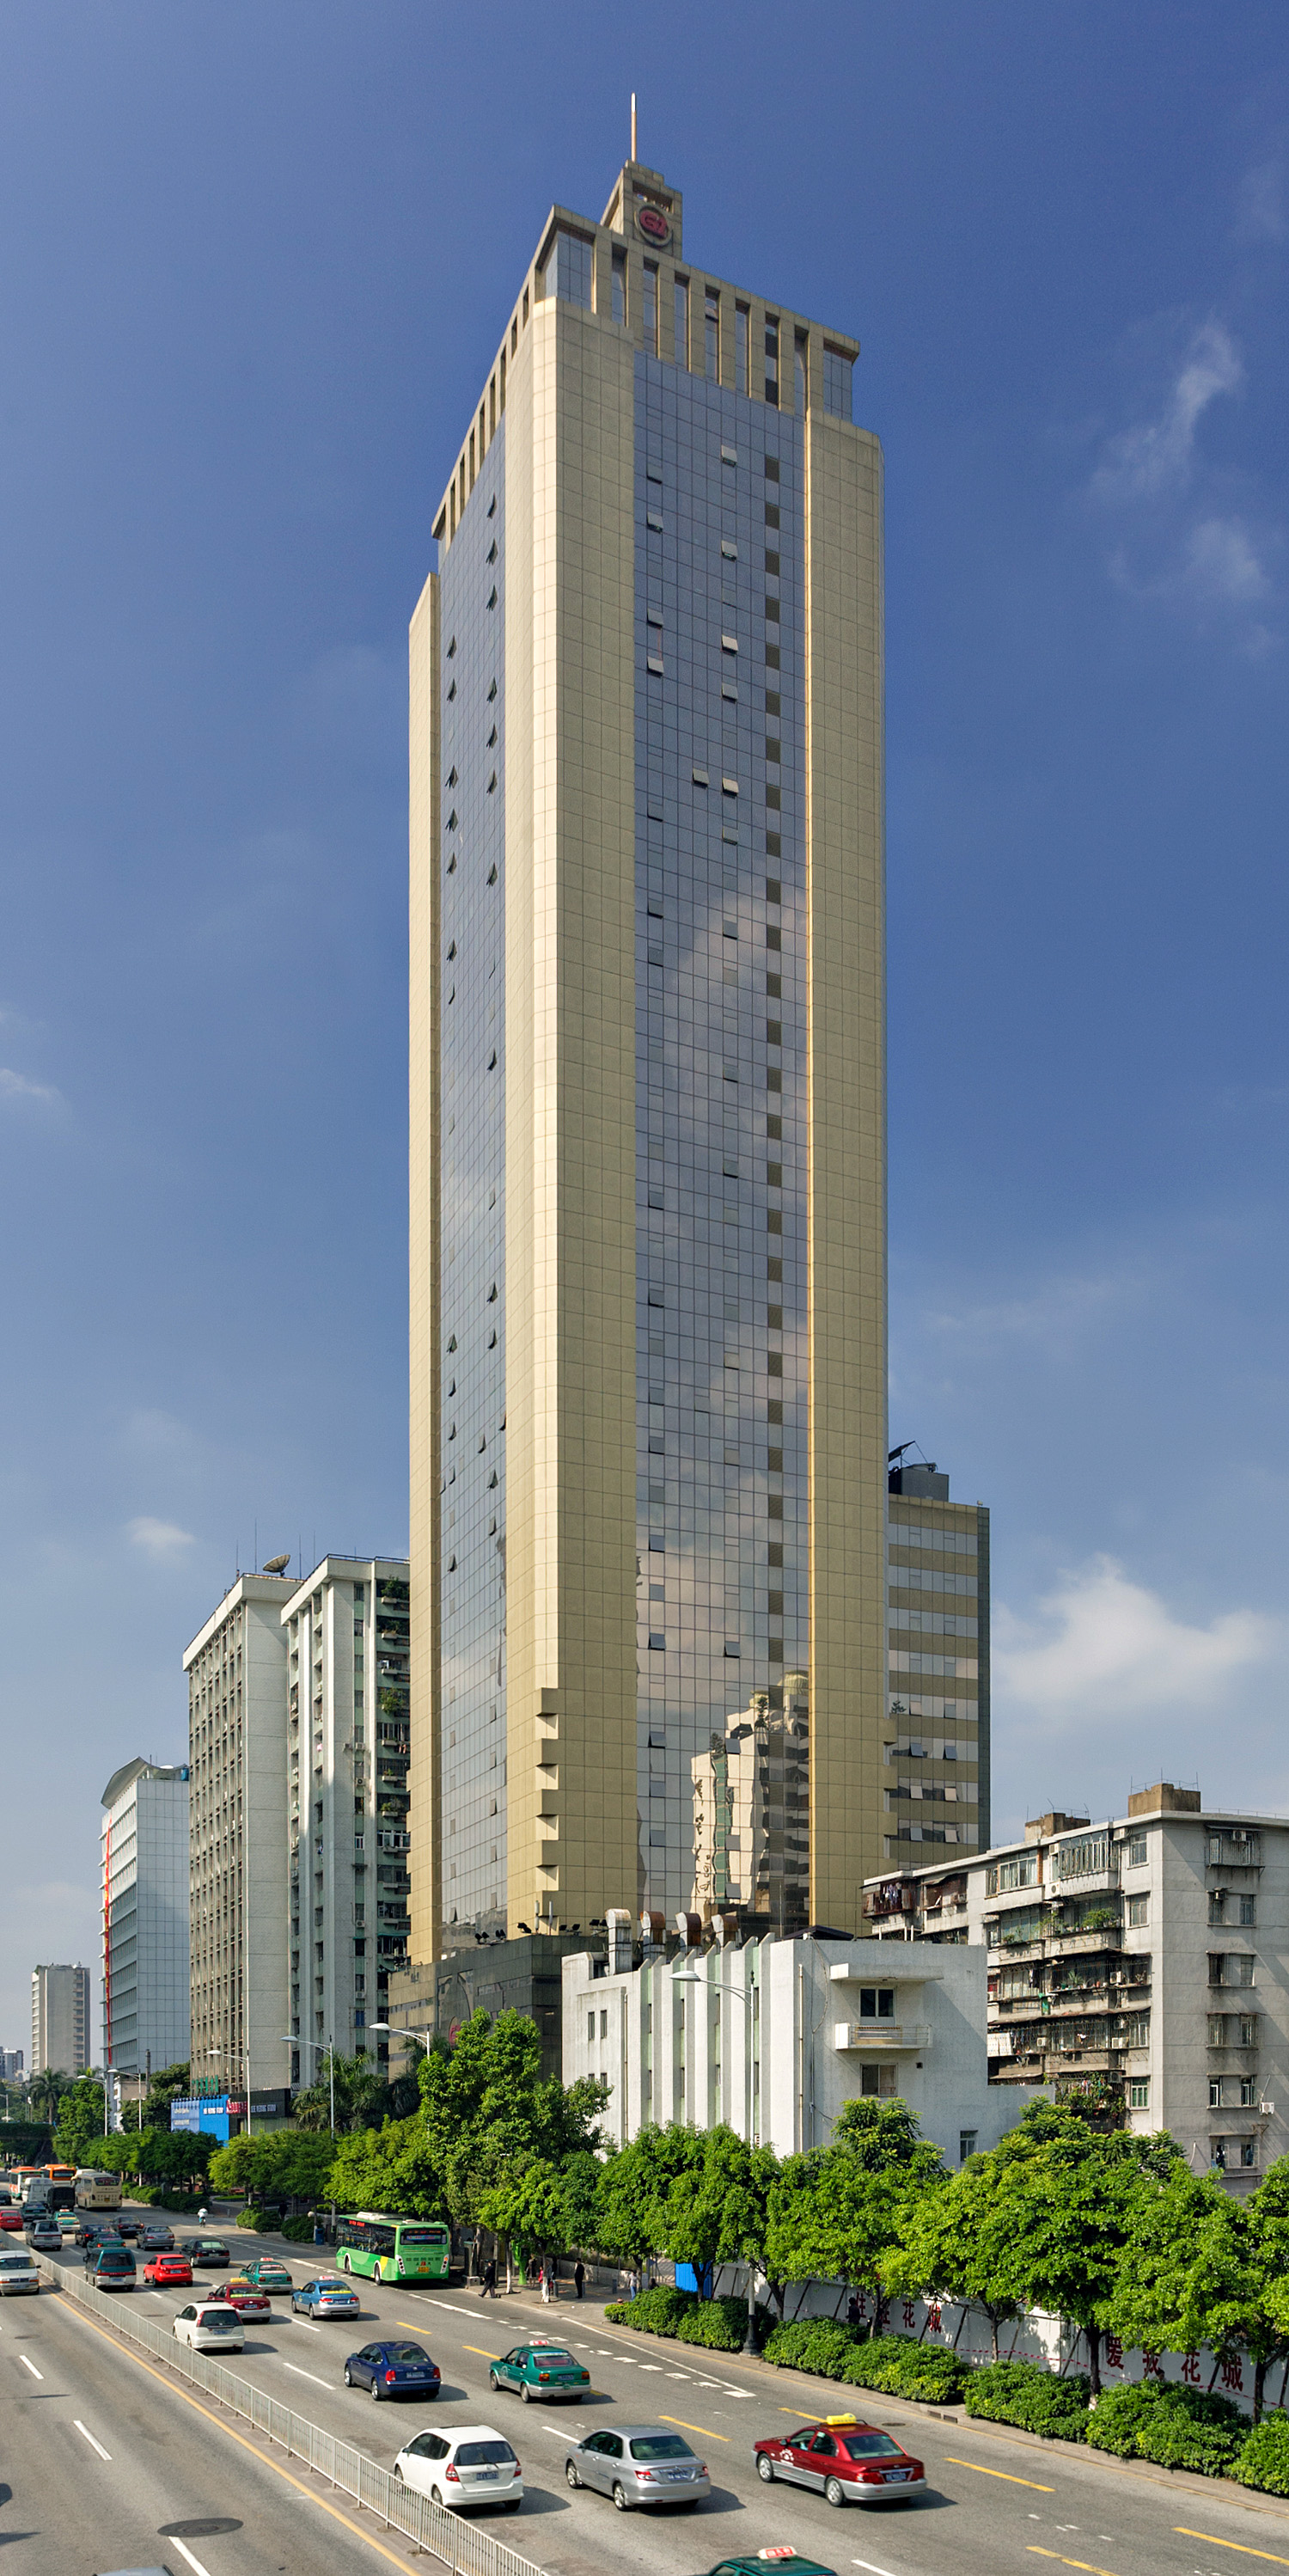 GZITIC Mansion, Guangzhou - View from the east. © Mathias Beinling